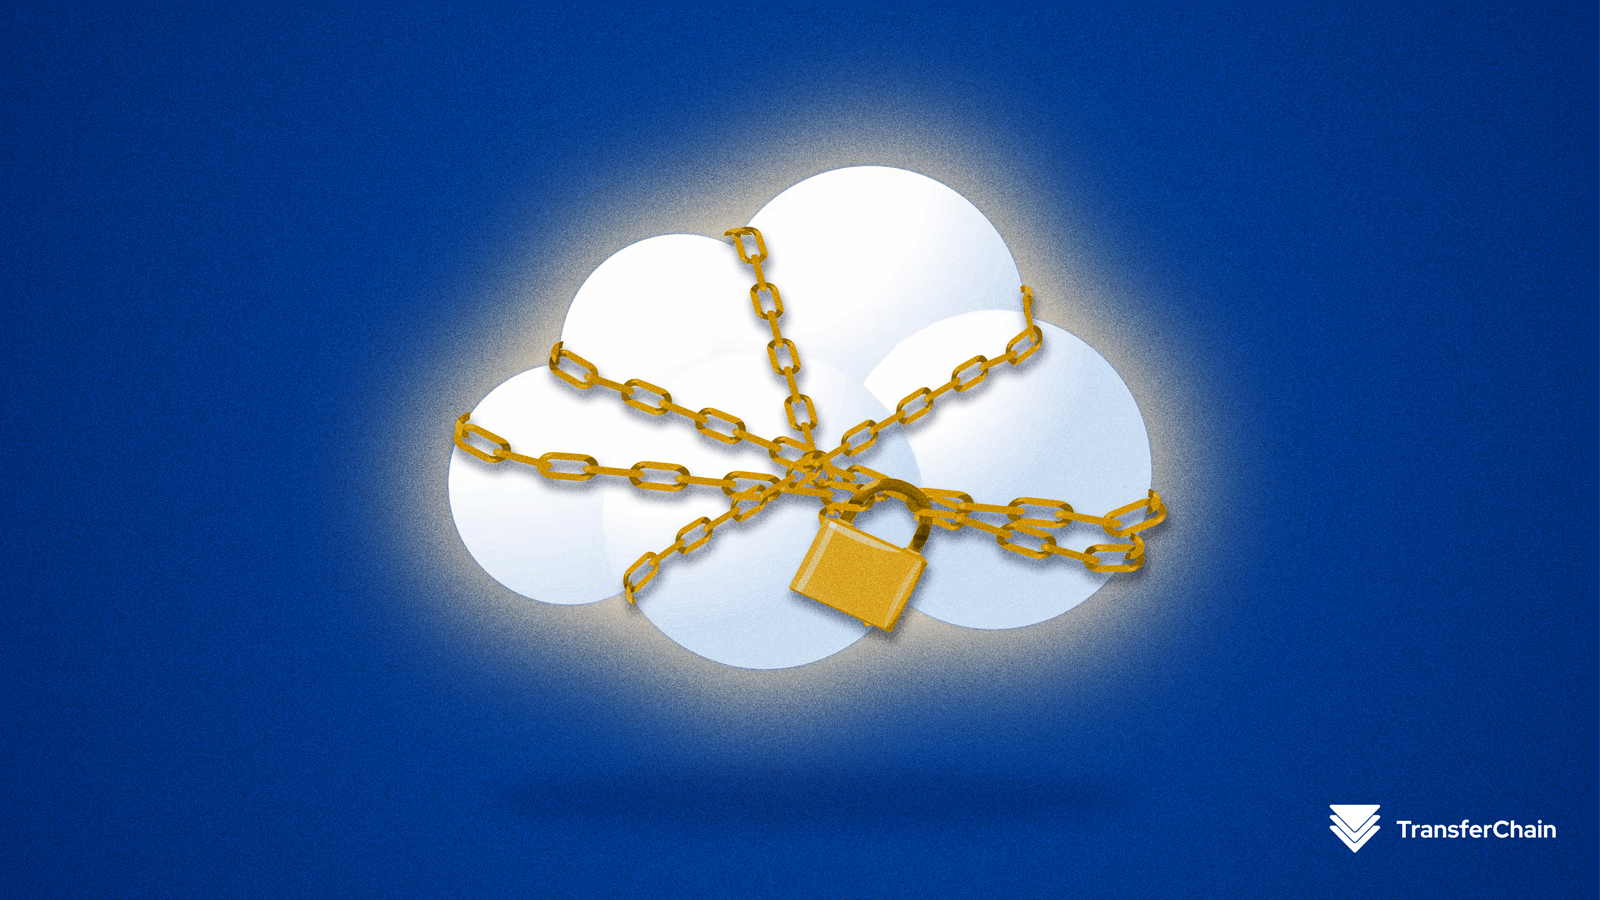 Key Methods for Achieving Robust Security in Cloud Storage